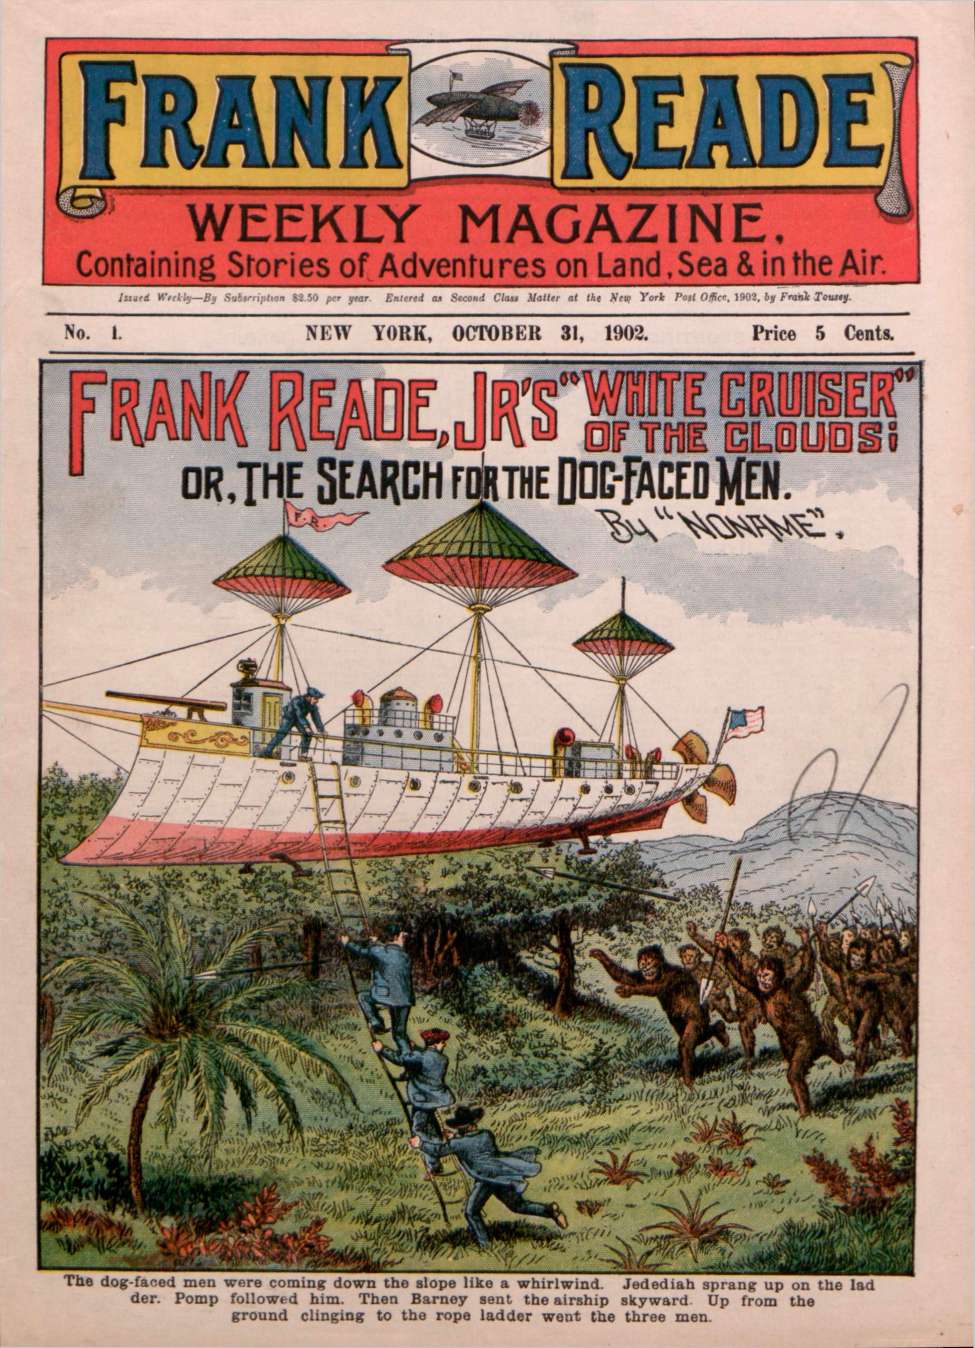 Comic Book Cover For Frank Reade Weekly Magazine v1 1 - White Cruiser of the Clouds